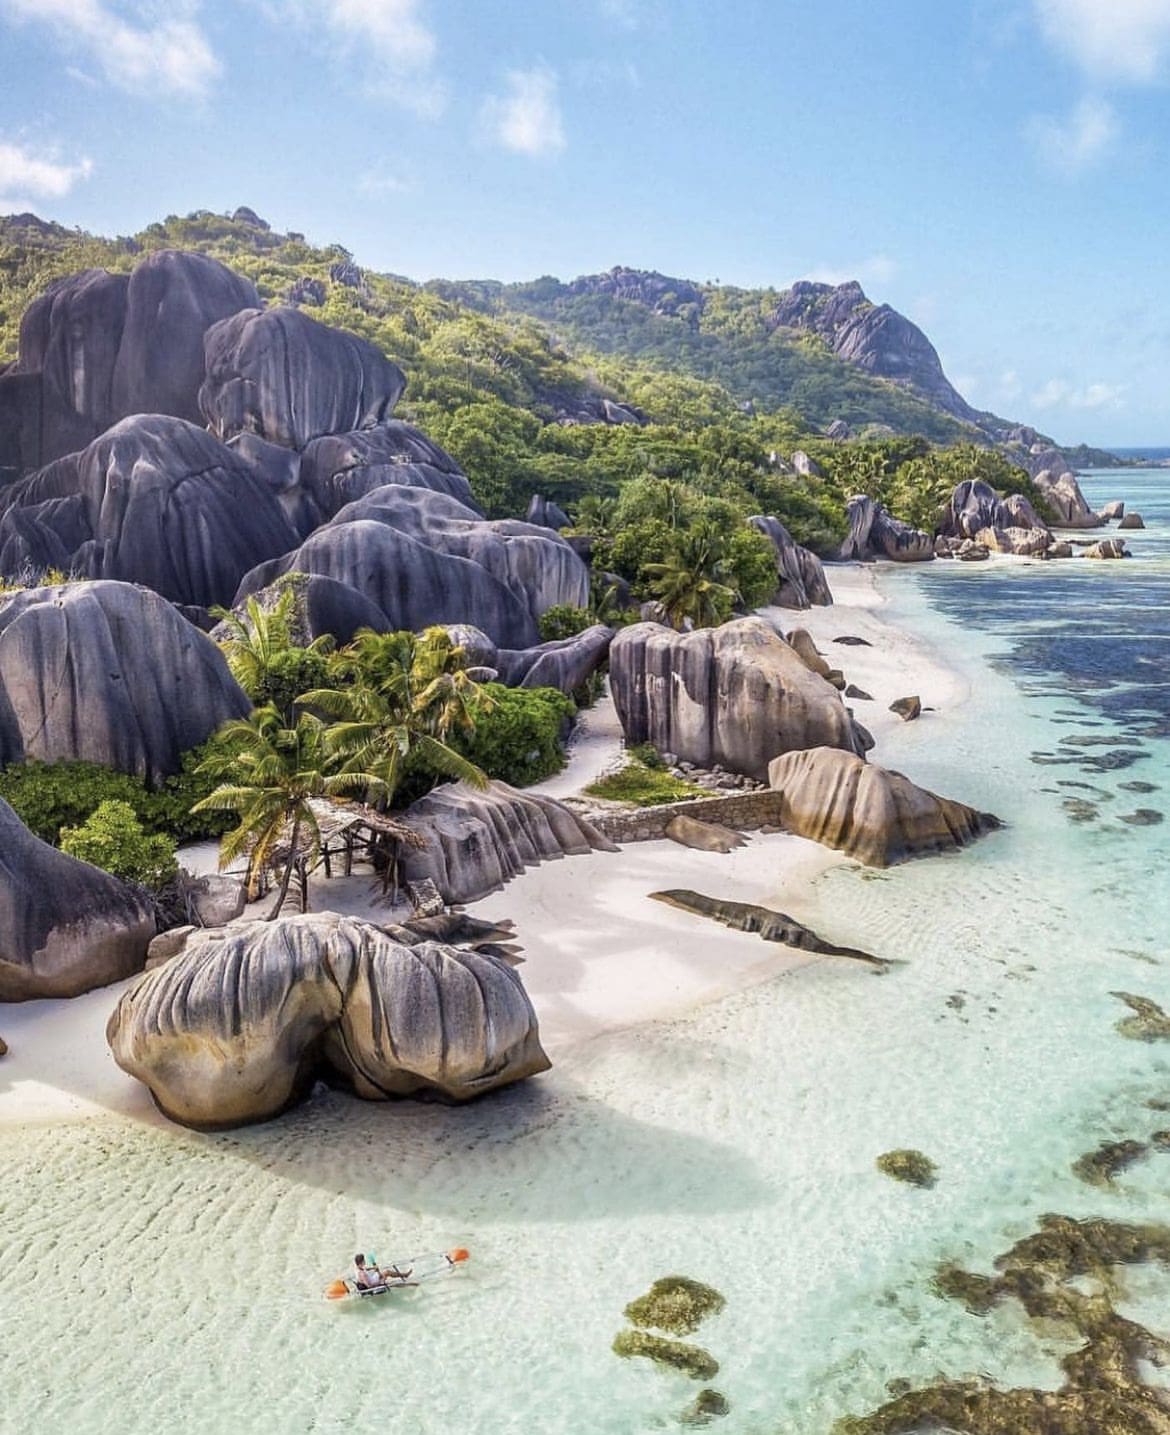 Where better for a relaxing afternoon than a private beach in the Seychelles